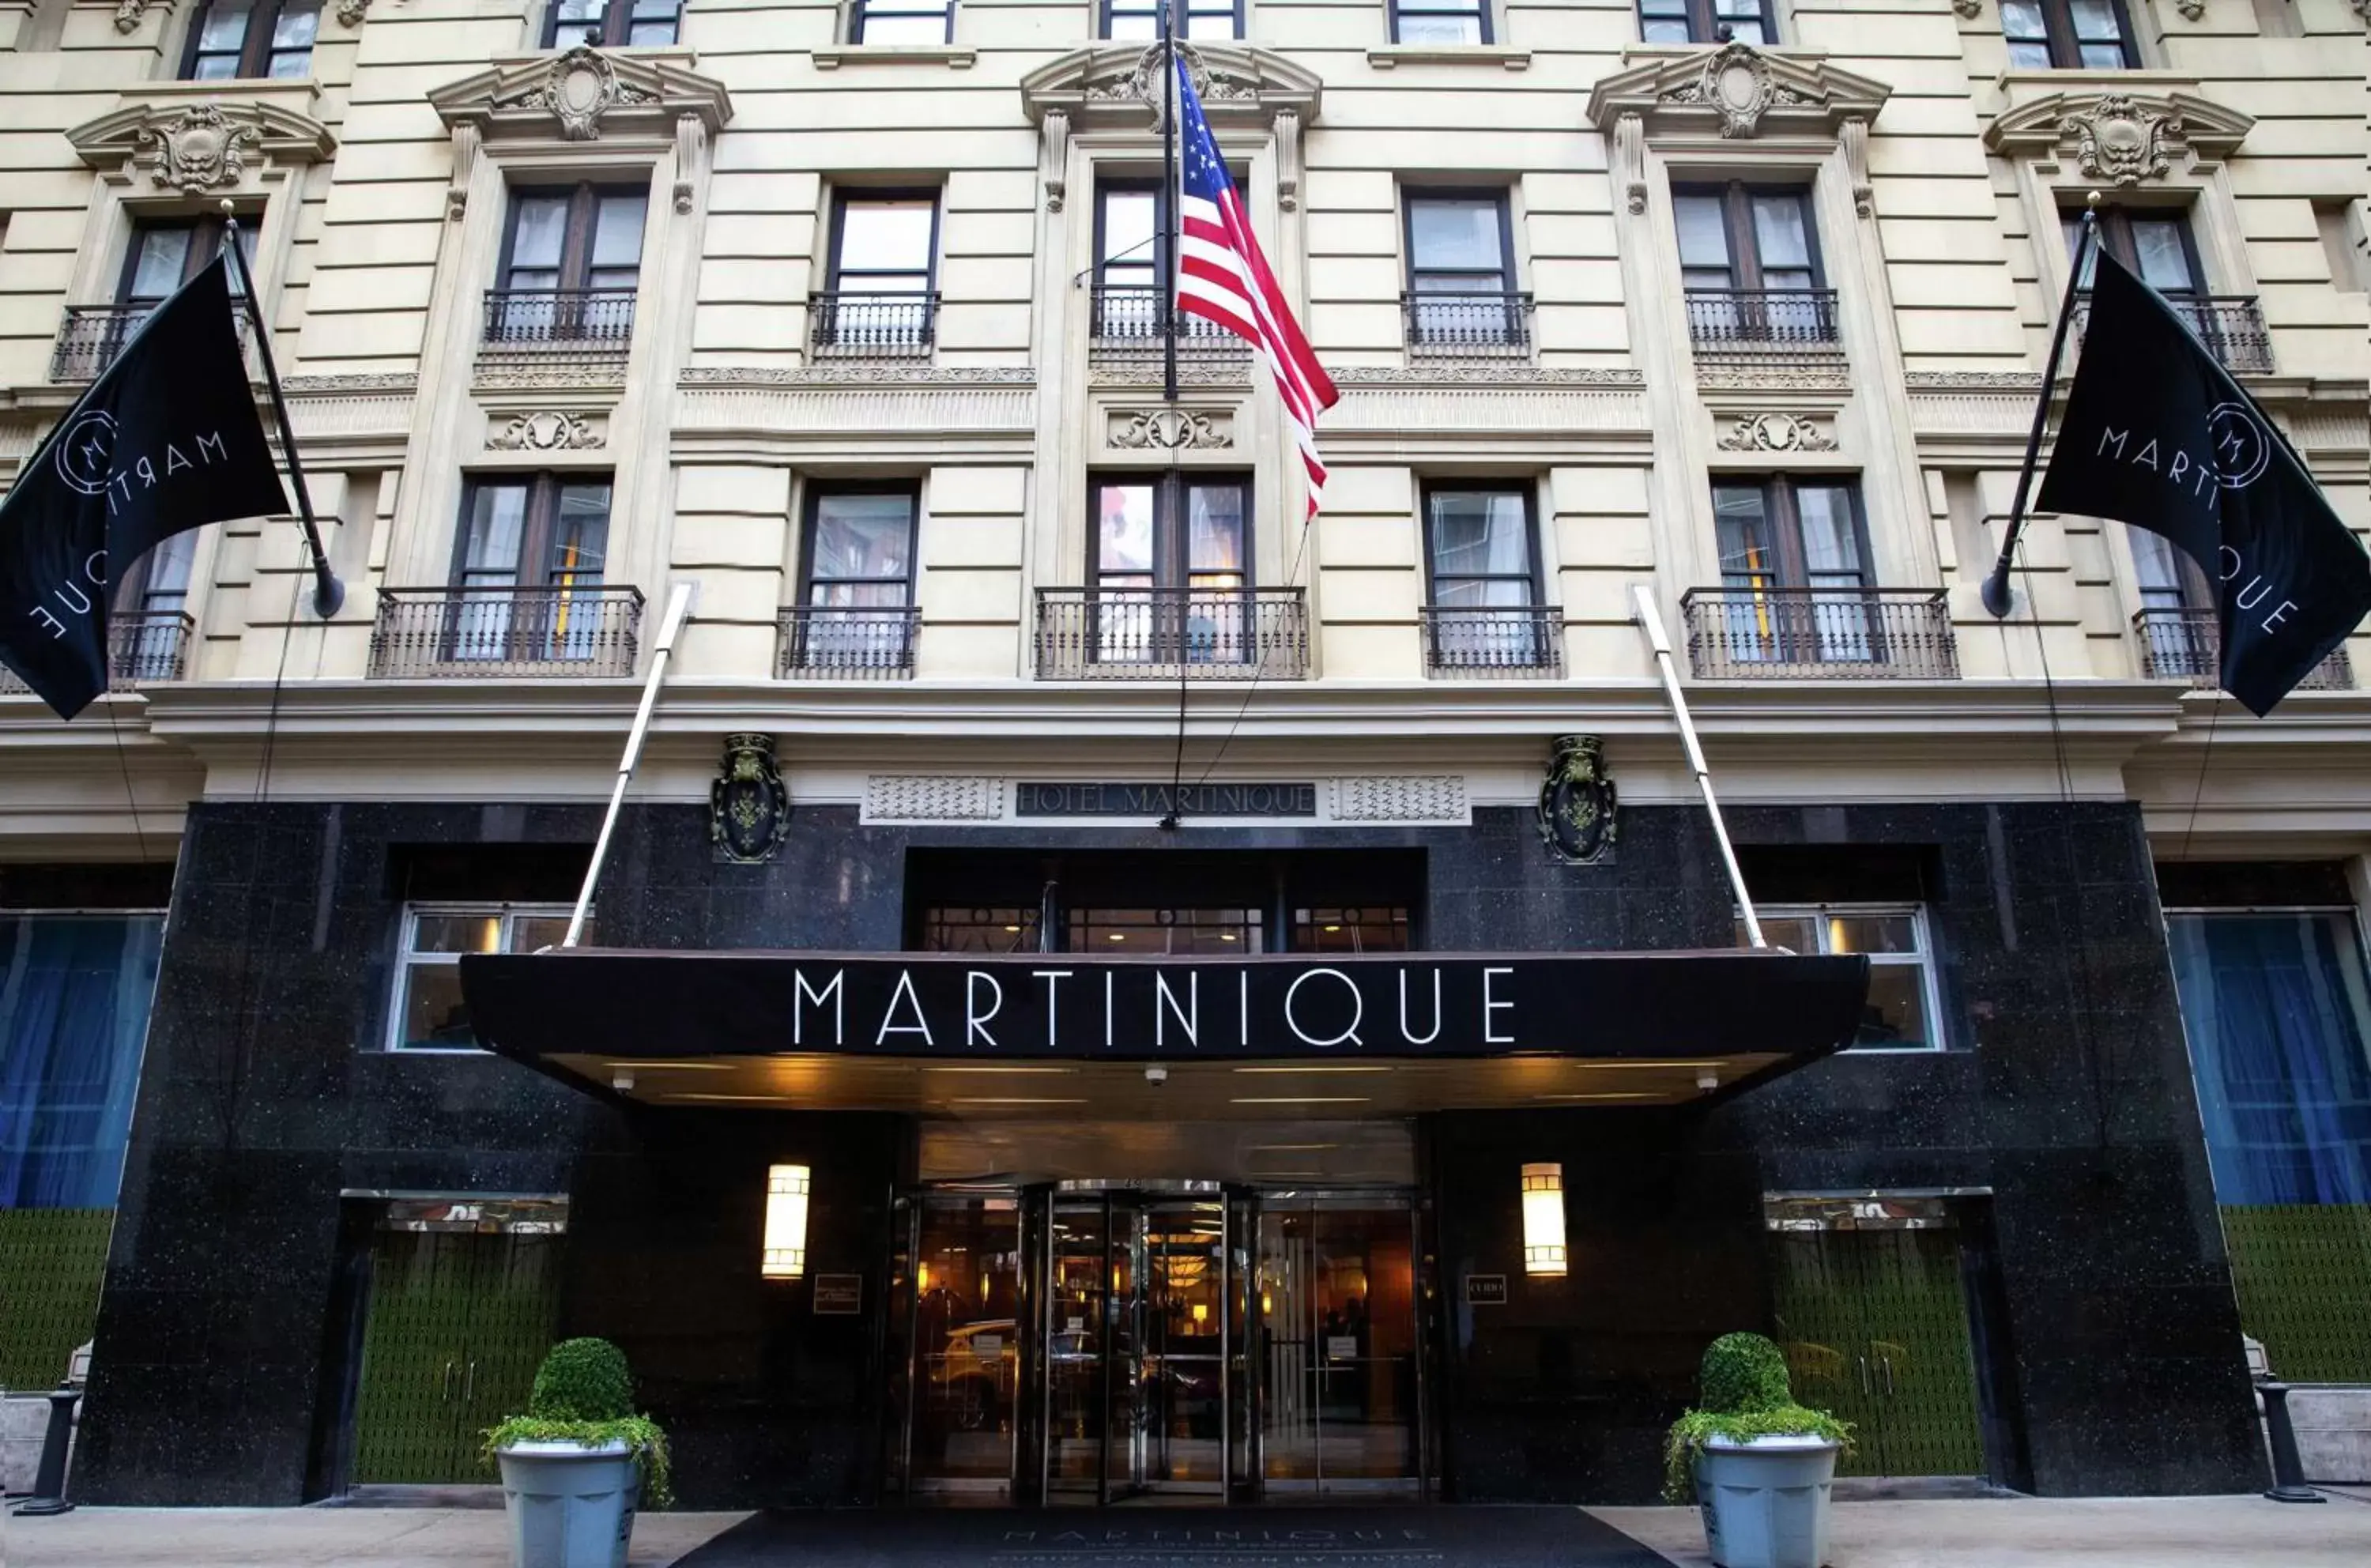 Property Building in Martinique New York on Broadway, Curio Collection by Hilton